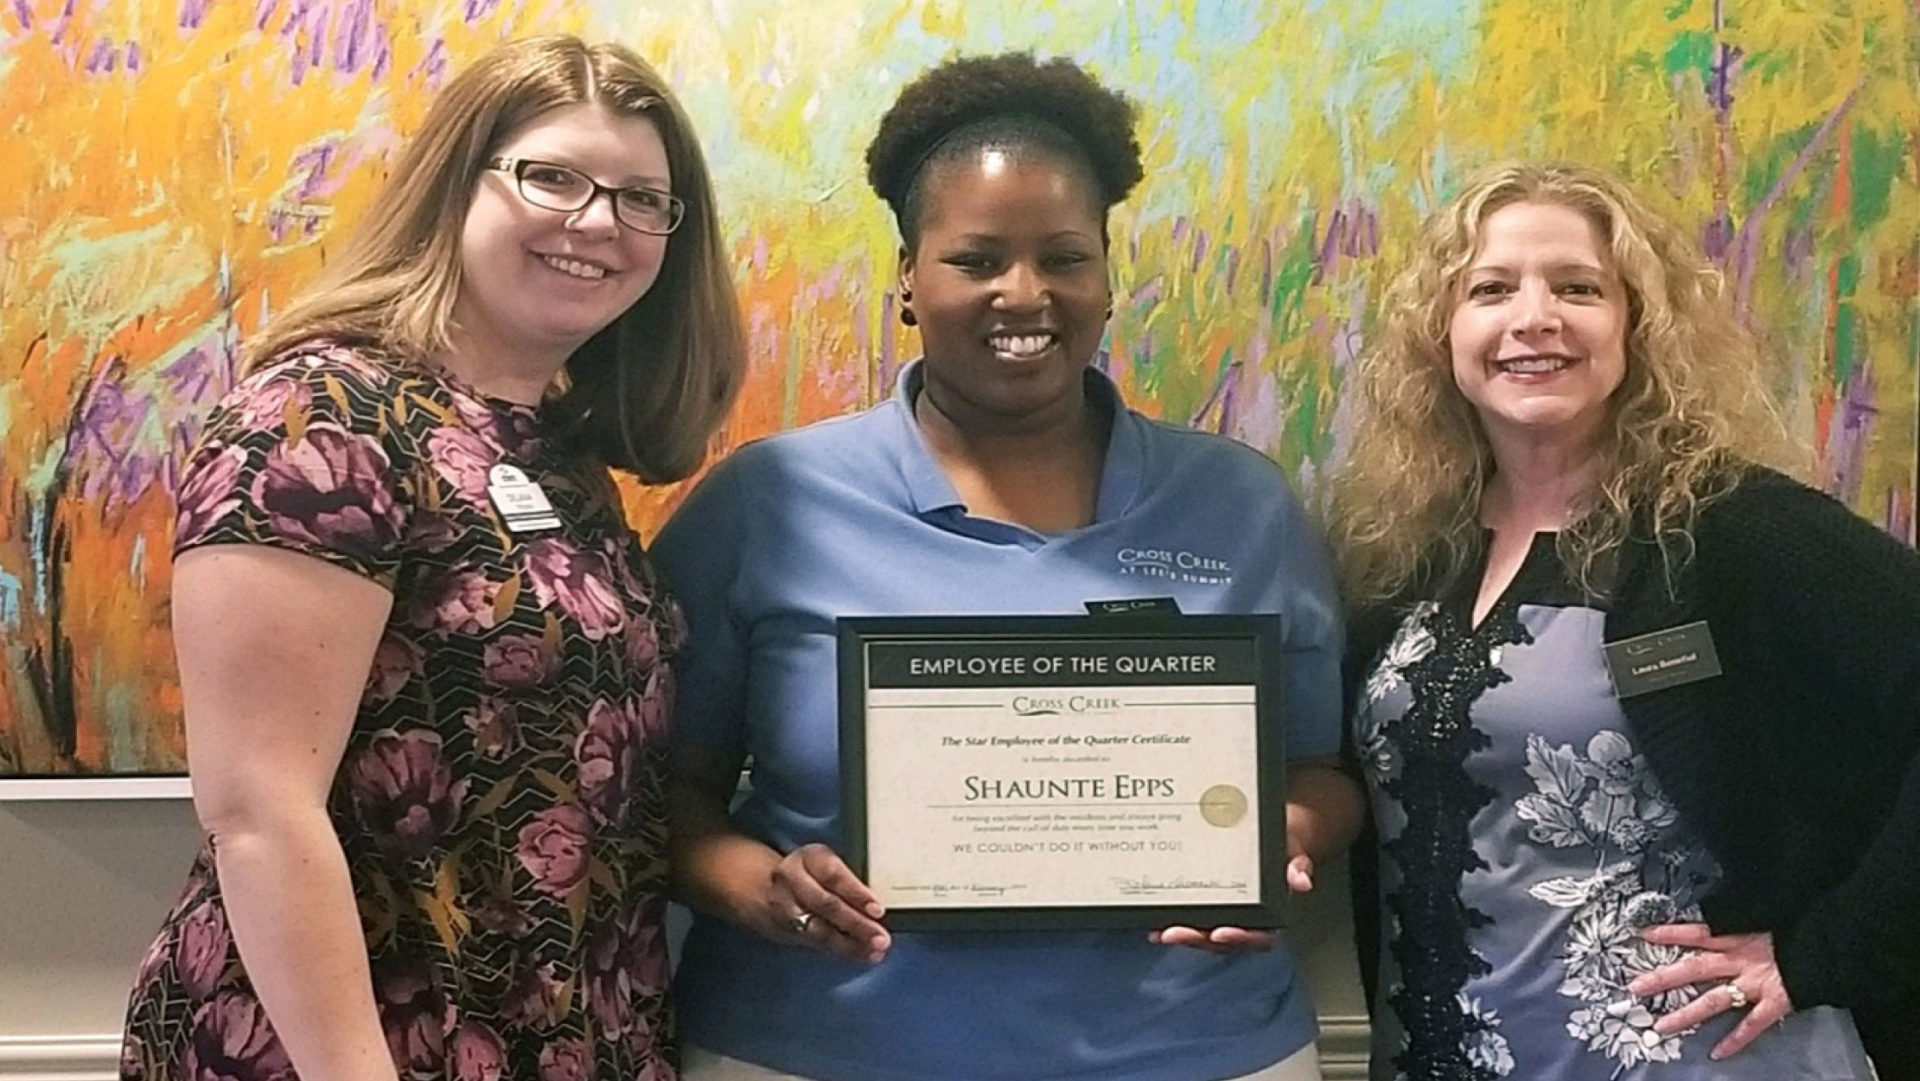 Cross Creek at Lee’s Summit Assisted Living | Memory Care recognizes an employee each quarter with a Star Employee of the Quarter award. This quarter’s award went to Shaunte Epps, CNA.